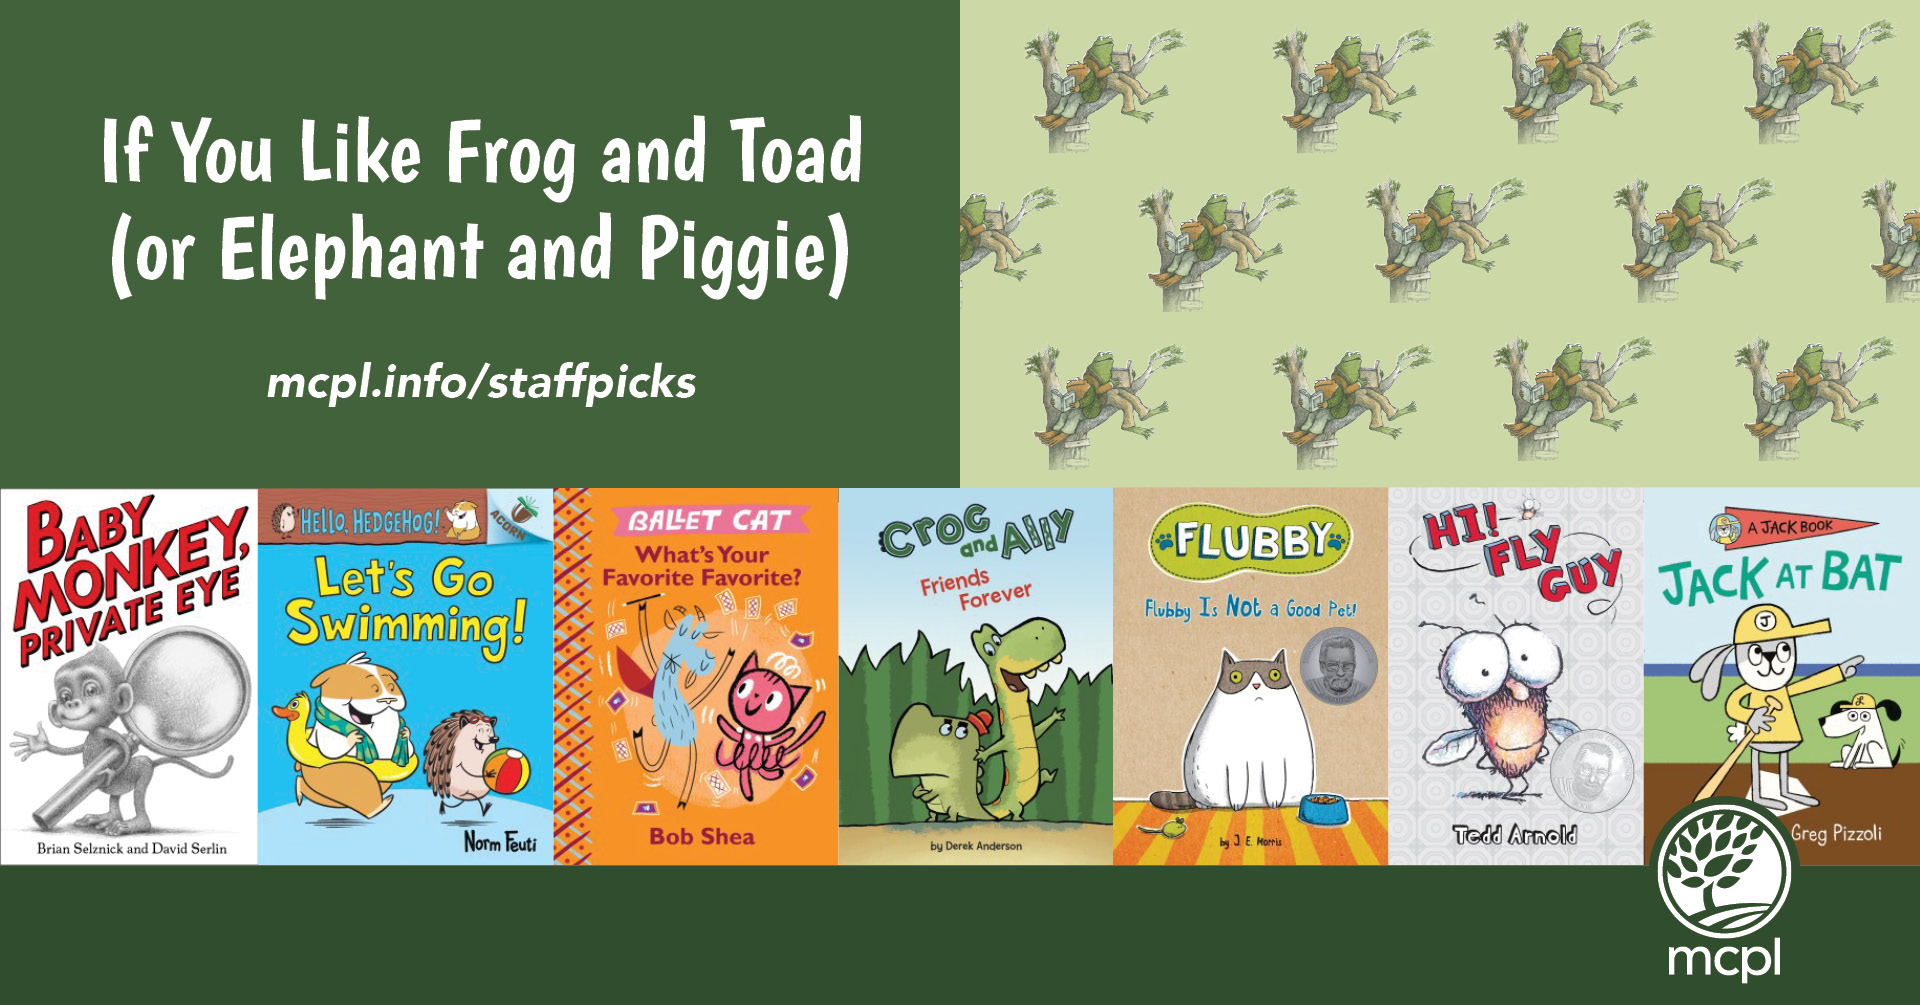 If You Like Frog and Toad (or Elephant and Piggie)